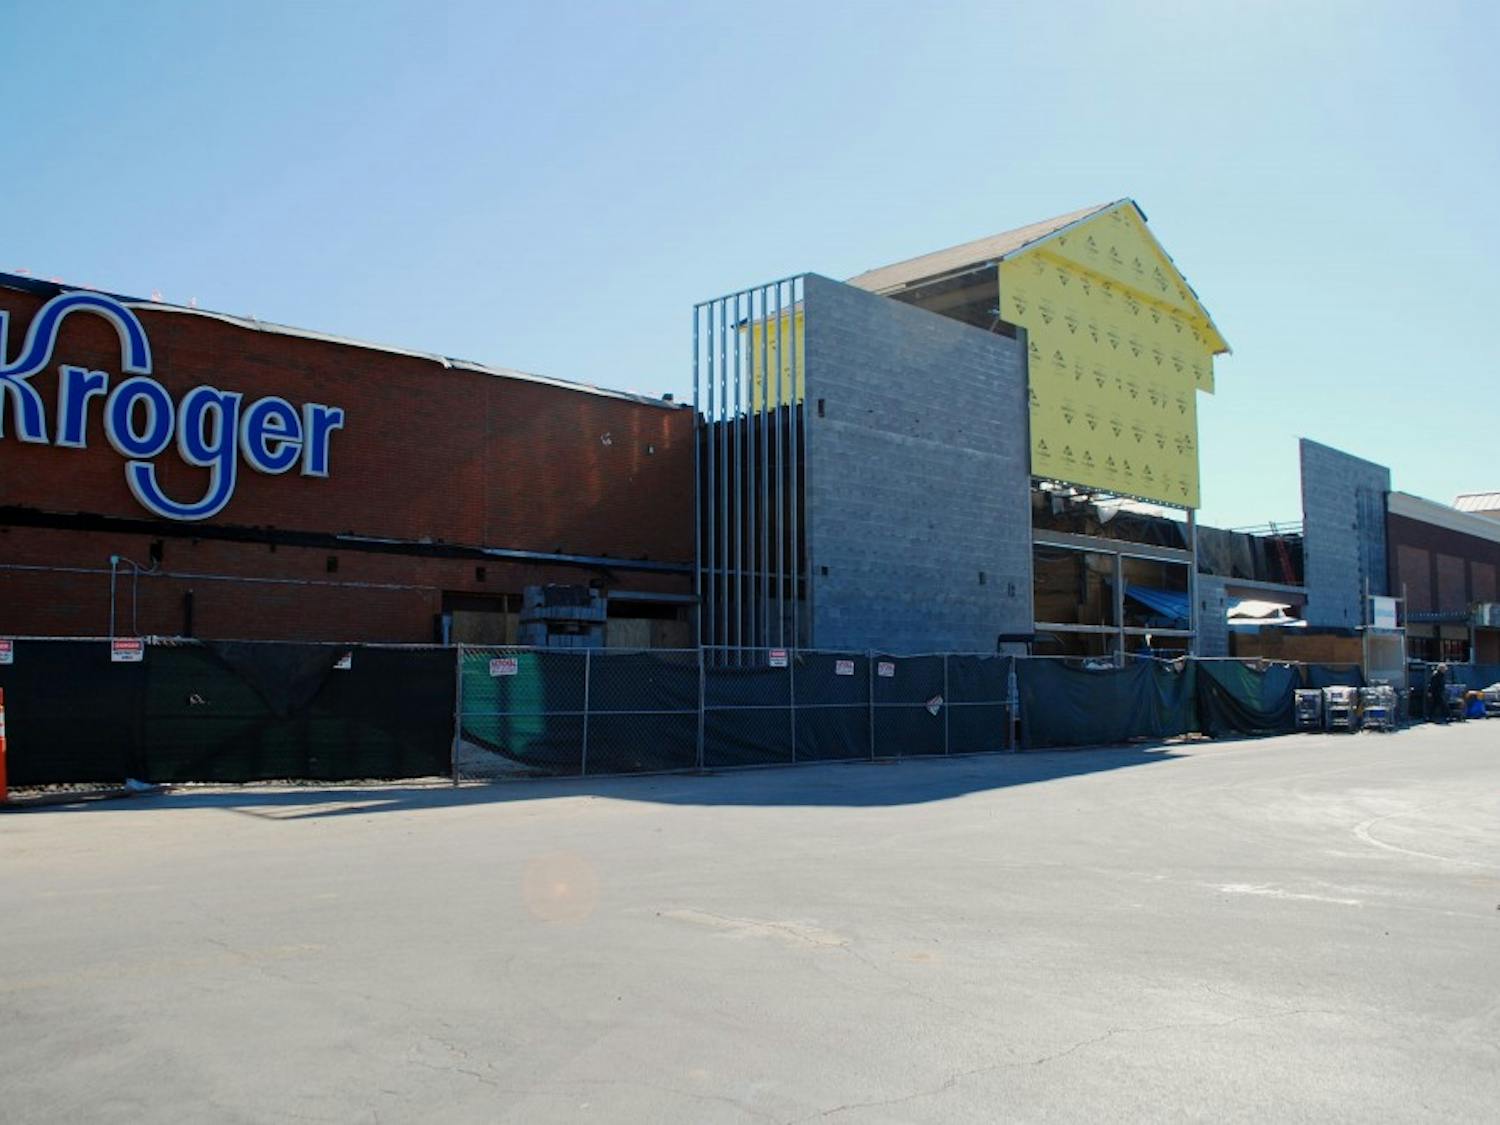 The Kroger on Dean Road is expected to be finished by summer 2016.